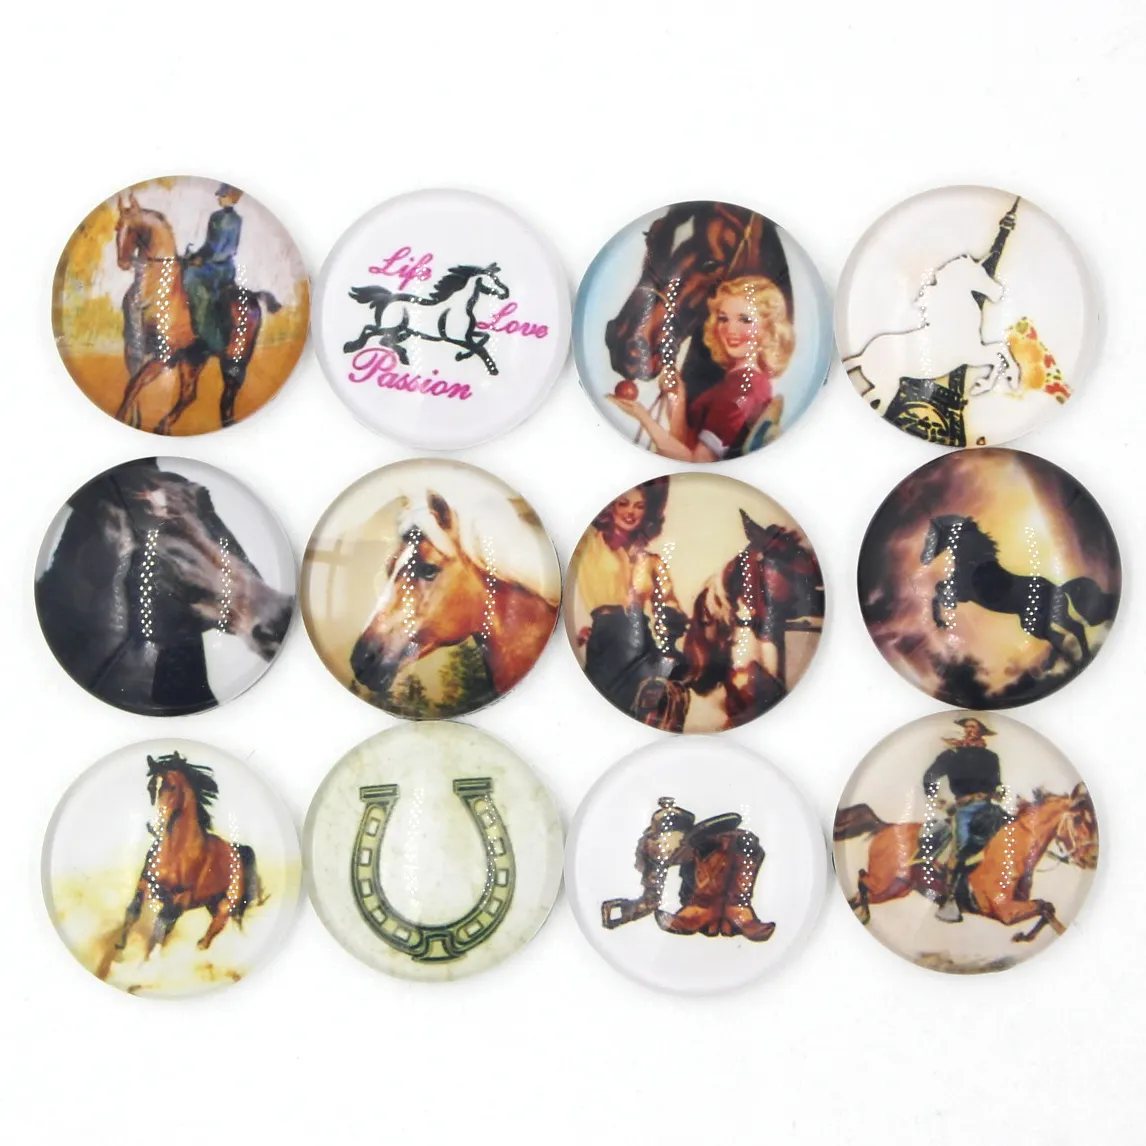 NEW Arrival 18mm Cabochon Glass Stone Button Equestrian Cowgirl Horse Horseshoe Buttons for Snap Bracelet Necklace Ring Earring Jewelry